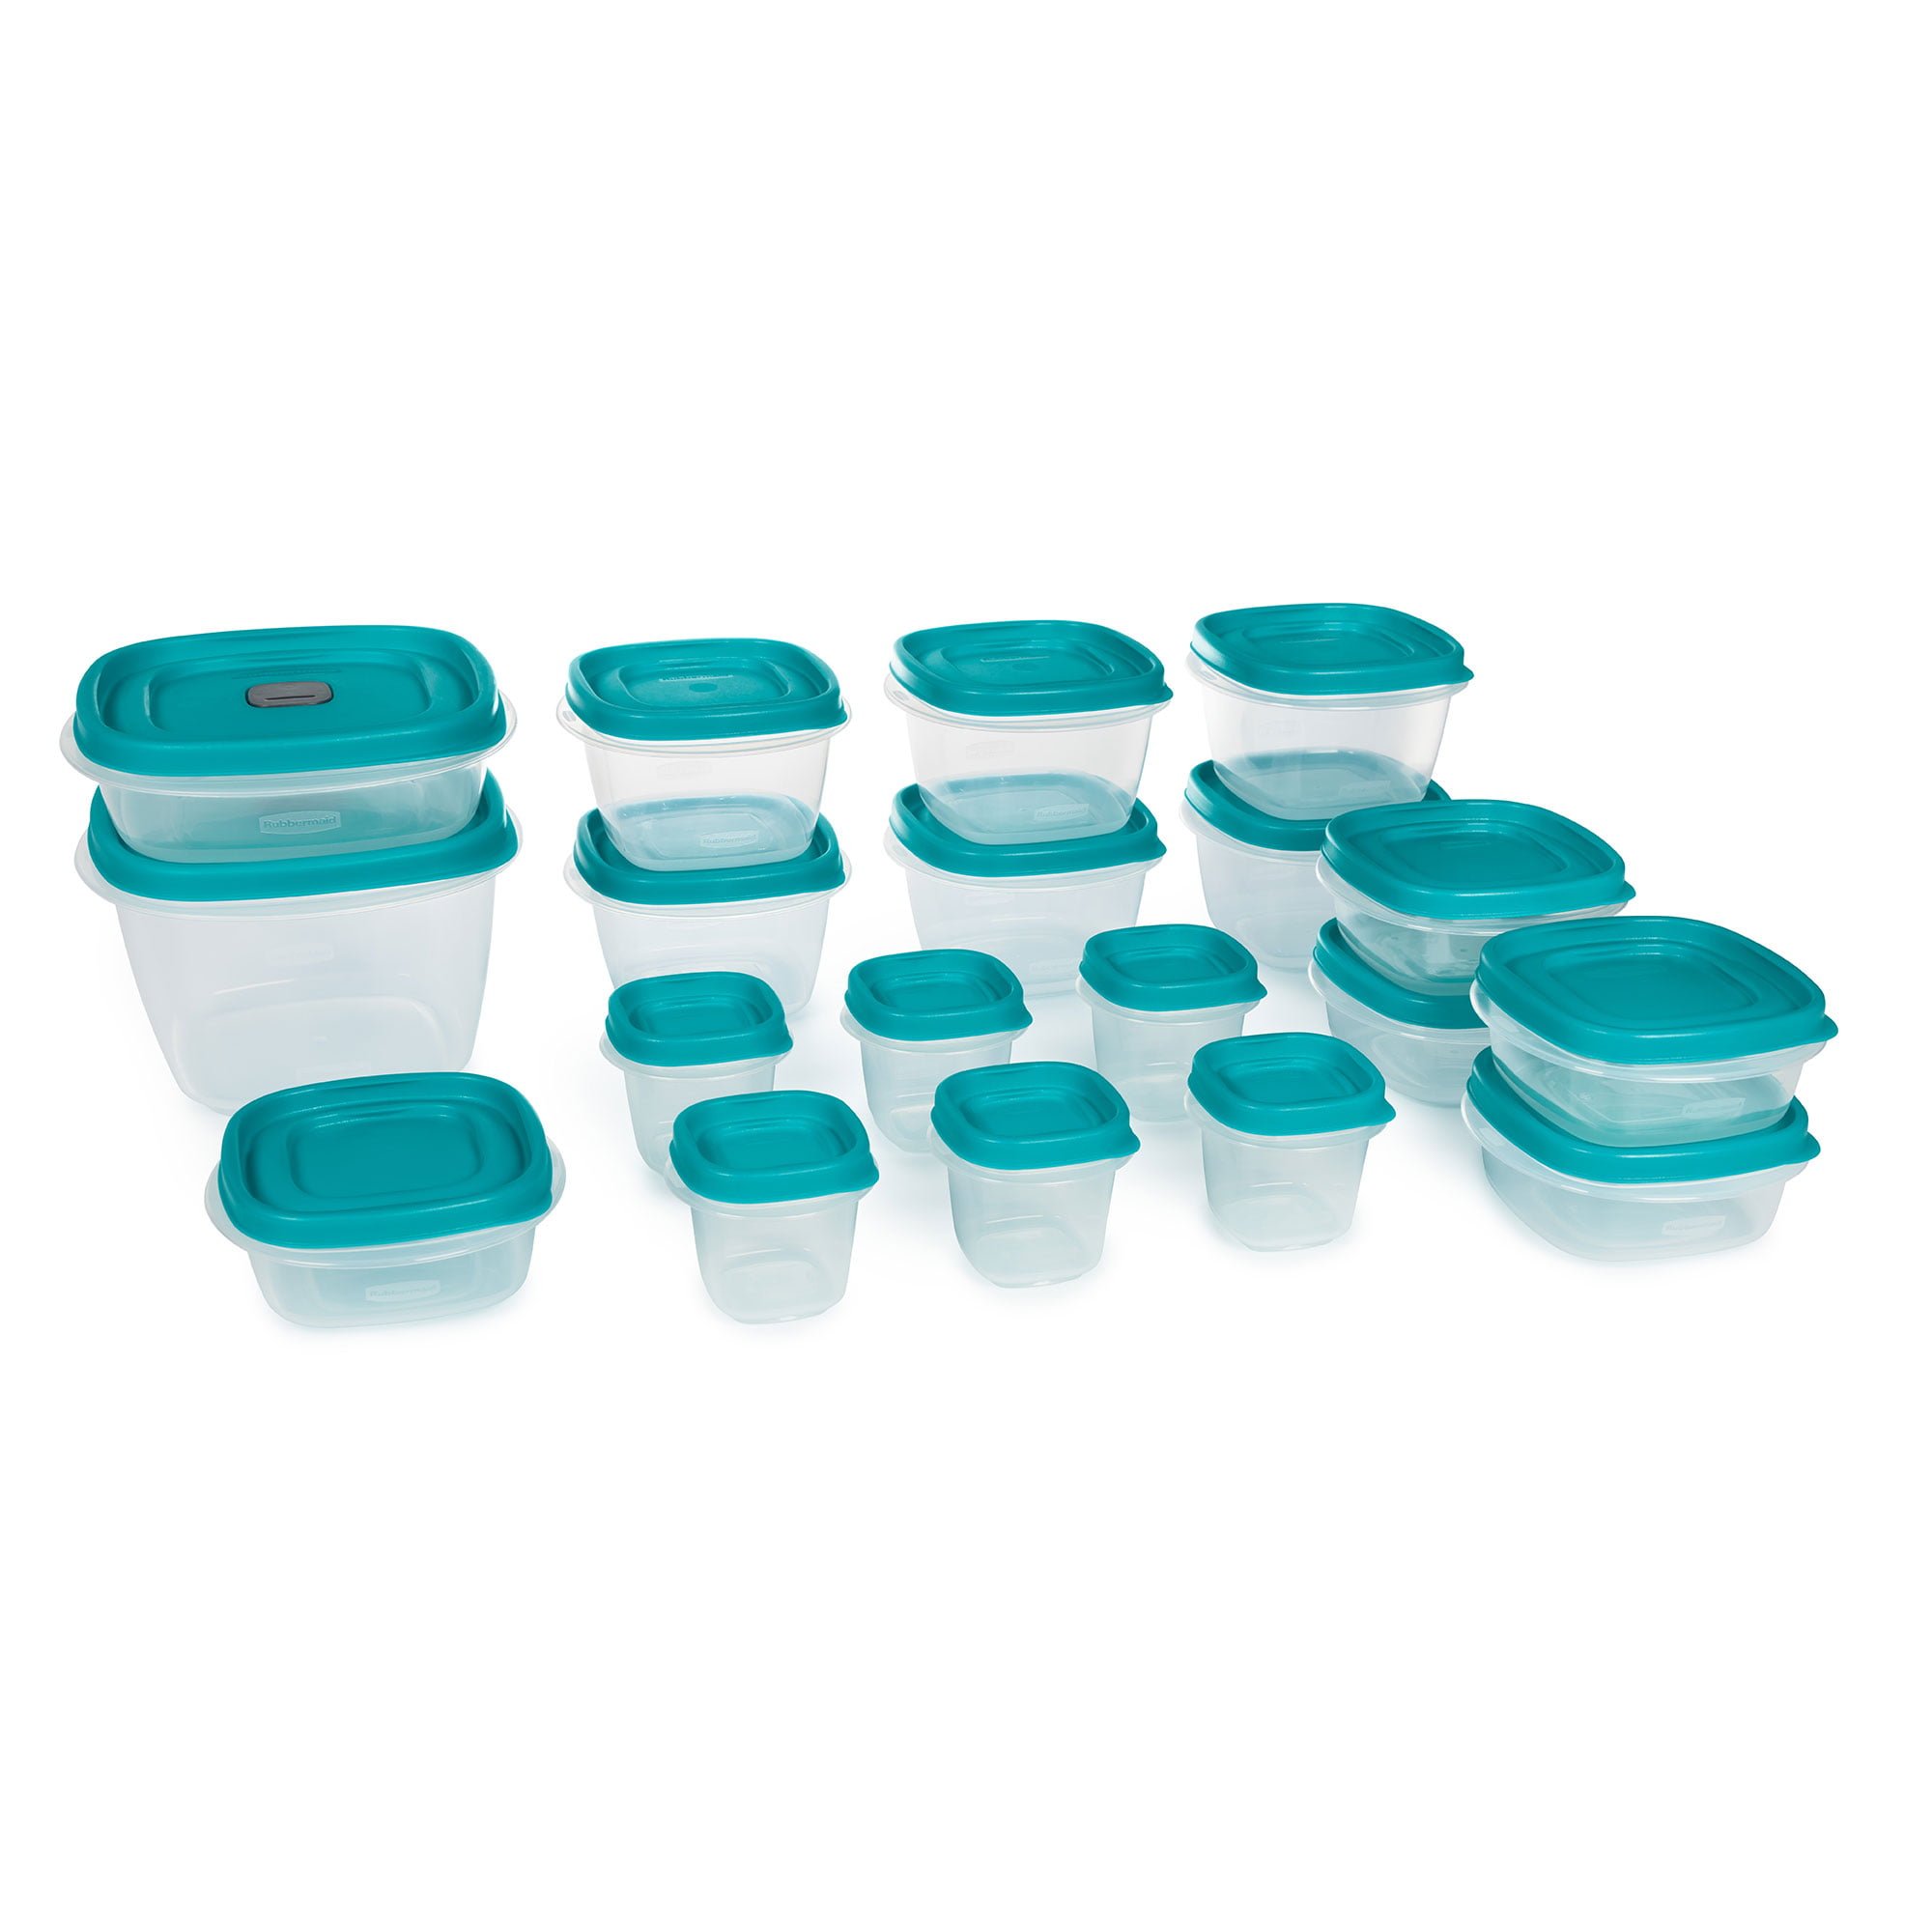 Rubbermaid Flex and Seal Food Storage Containers with Easy Find Lids, 42 Piece Set, Teal, Blue